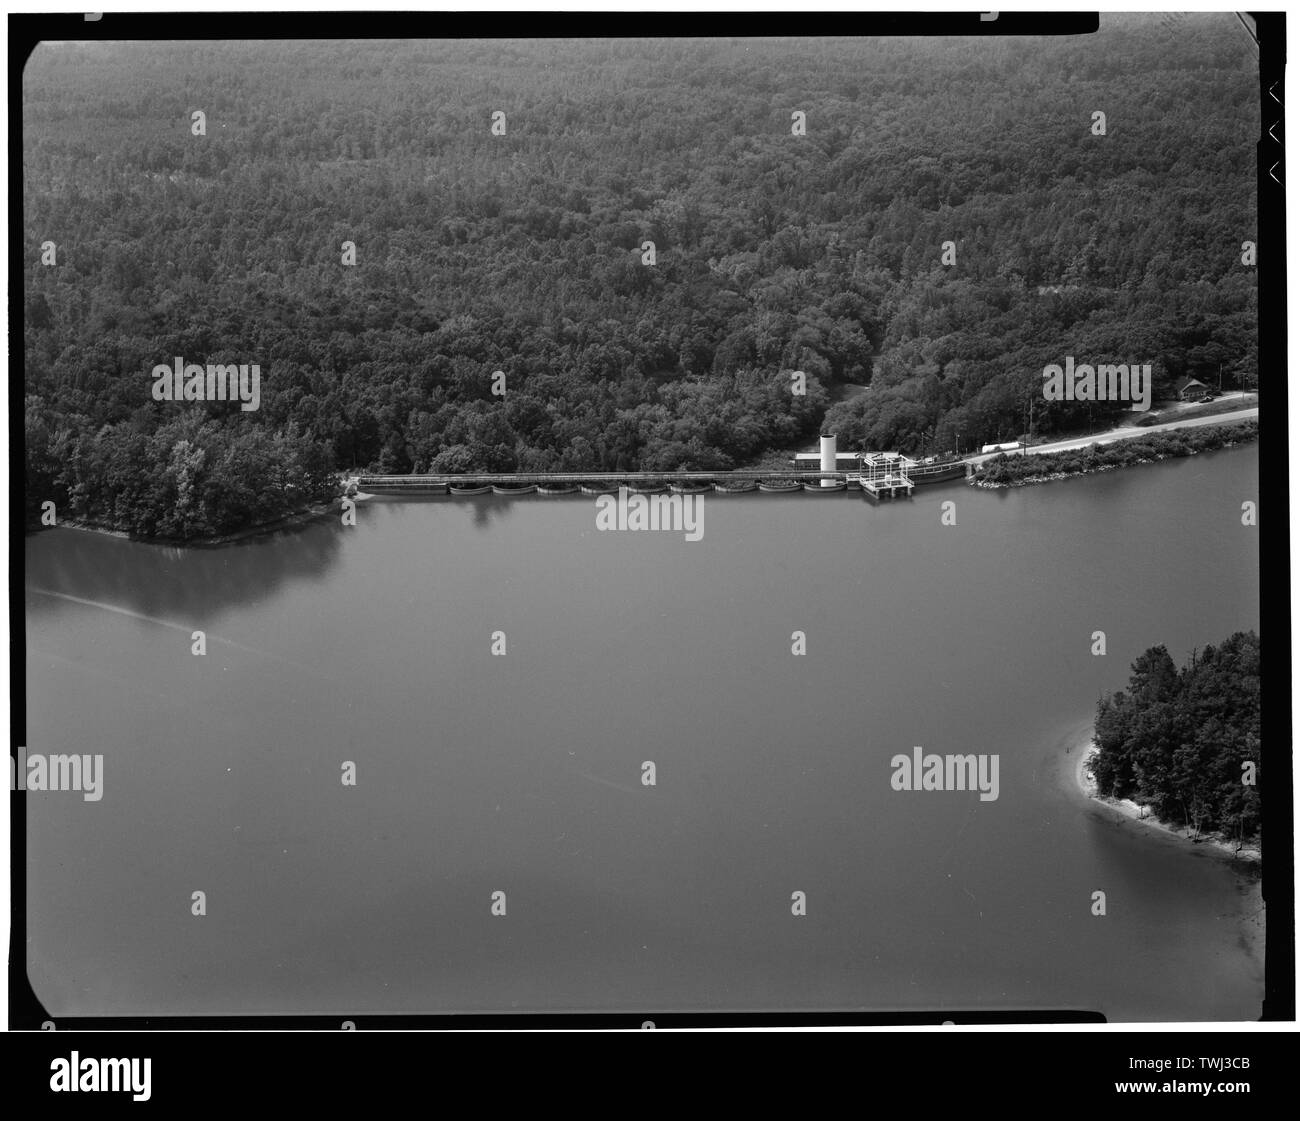 Secession Lake dam- general aerial view from lake towards dam - Abbeville Hydroelectric Power Plant, State Highway 284 and County Road 72, Rocky River (historical), Abbeville County, SC; Abbeville Water and Electric Plant Company; Pennell, James Roy; White, W H; Abbeville Power Company Incorporated; D.M. Rickenbacker Construction Company; Townsend, C P; Wideman and Singleton; Britton, John B; S. Morgan Smith Company; Woodward Governor Company; Bethlehem Steel Company; Westinghouse Corporation; Bush Sulzer Brothers Company; Mark Brothers; Cary, Brian, transmitter Stock Photo